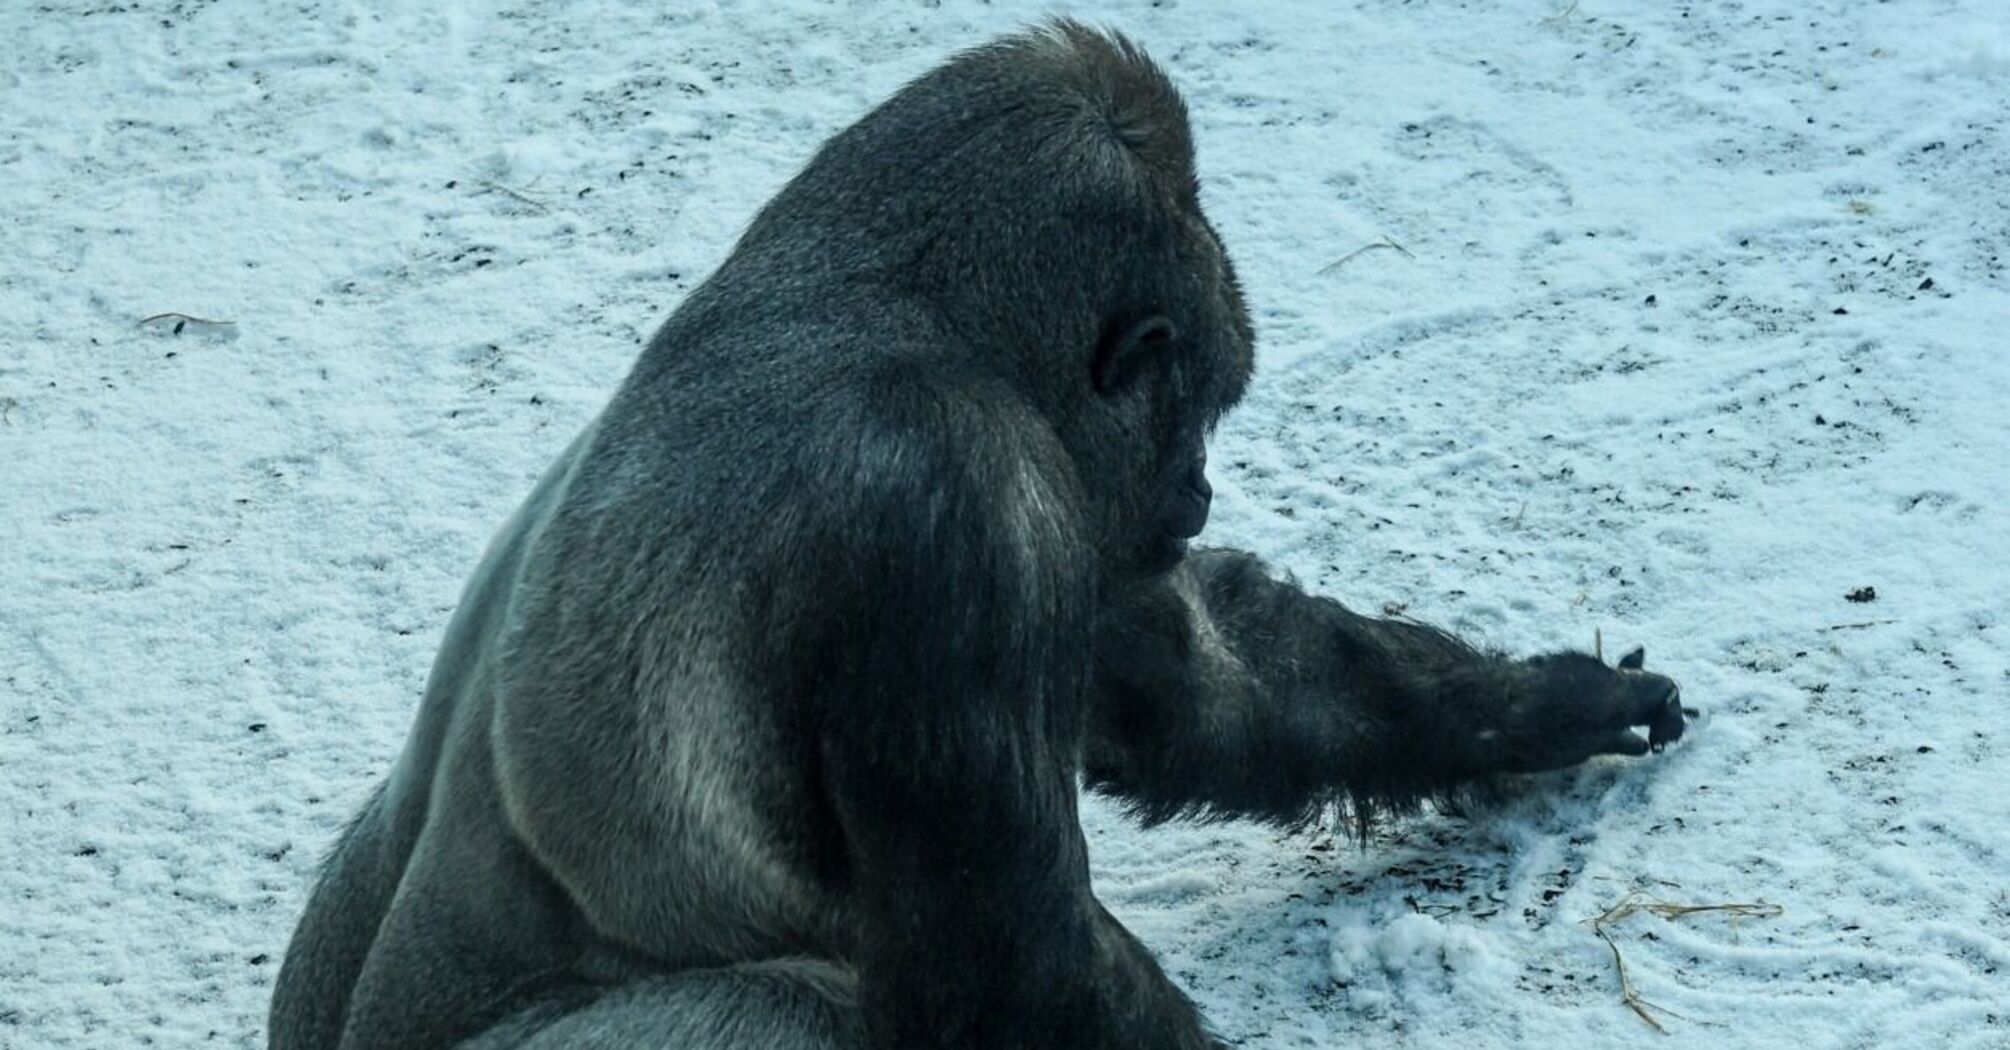 In Belfast Zoo, a video of a gorilla playing with snow was shared